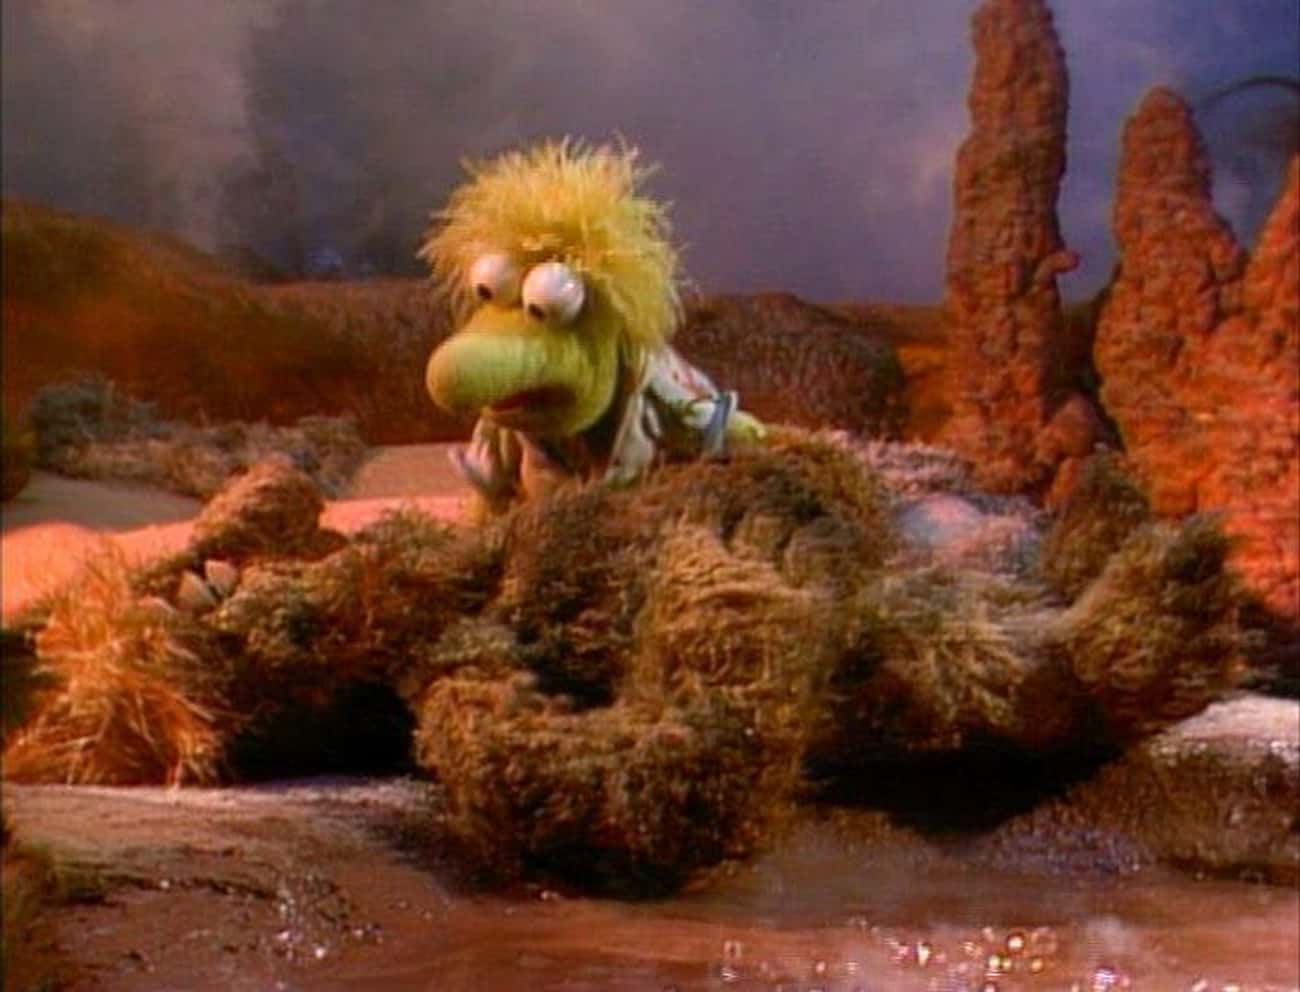 'Fraggle Rock' Isn't Afraid To Deal With Mortality